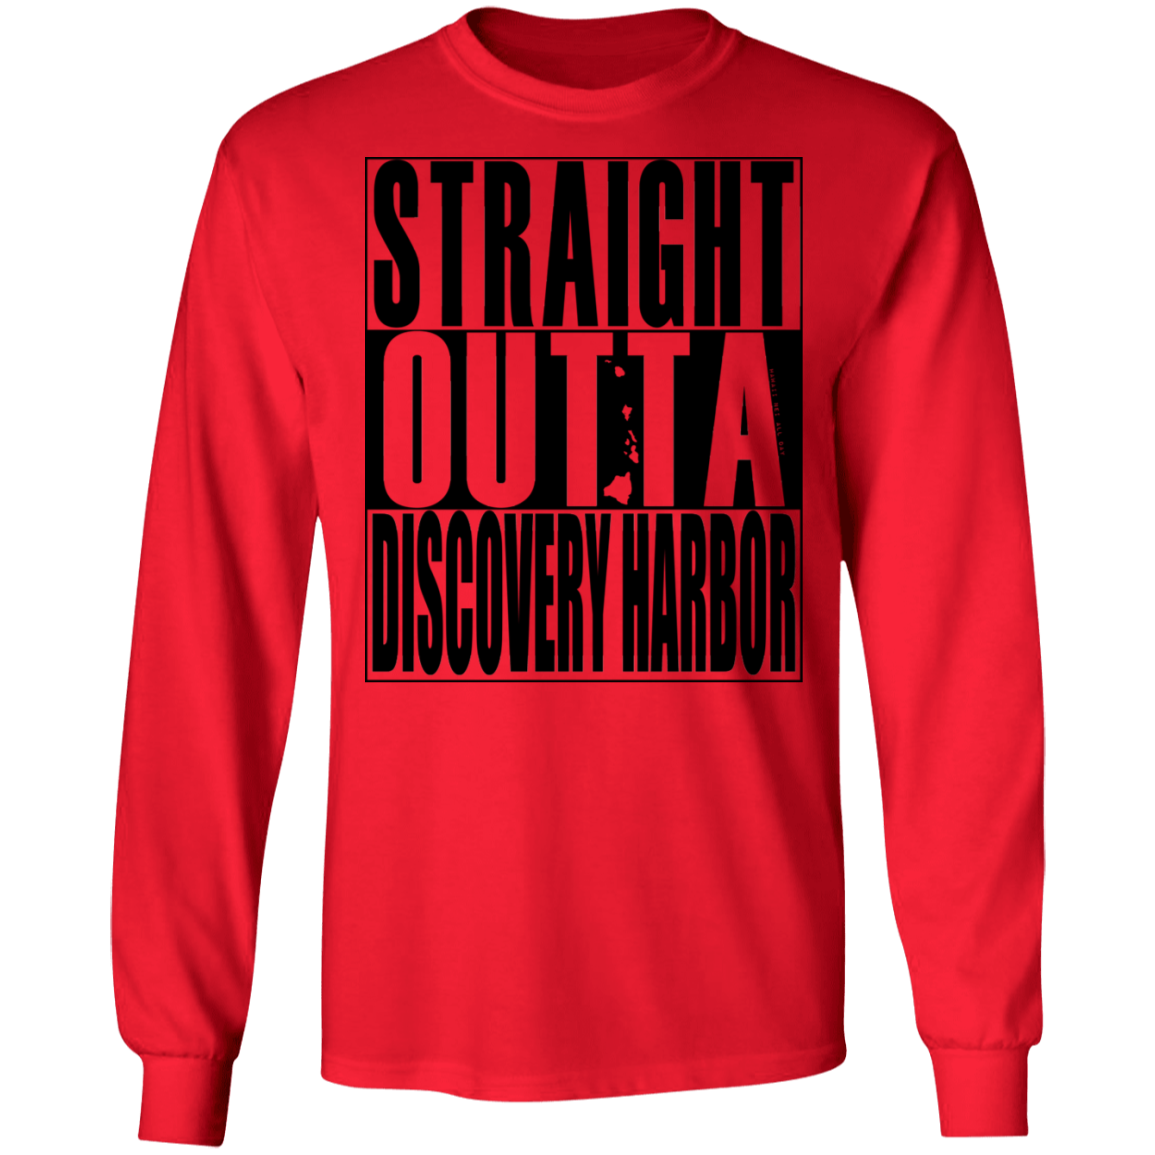 Straight Outta Discovery Harbor(black ink) LS T-Shirt